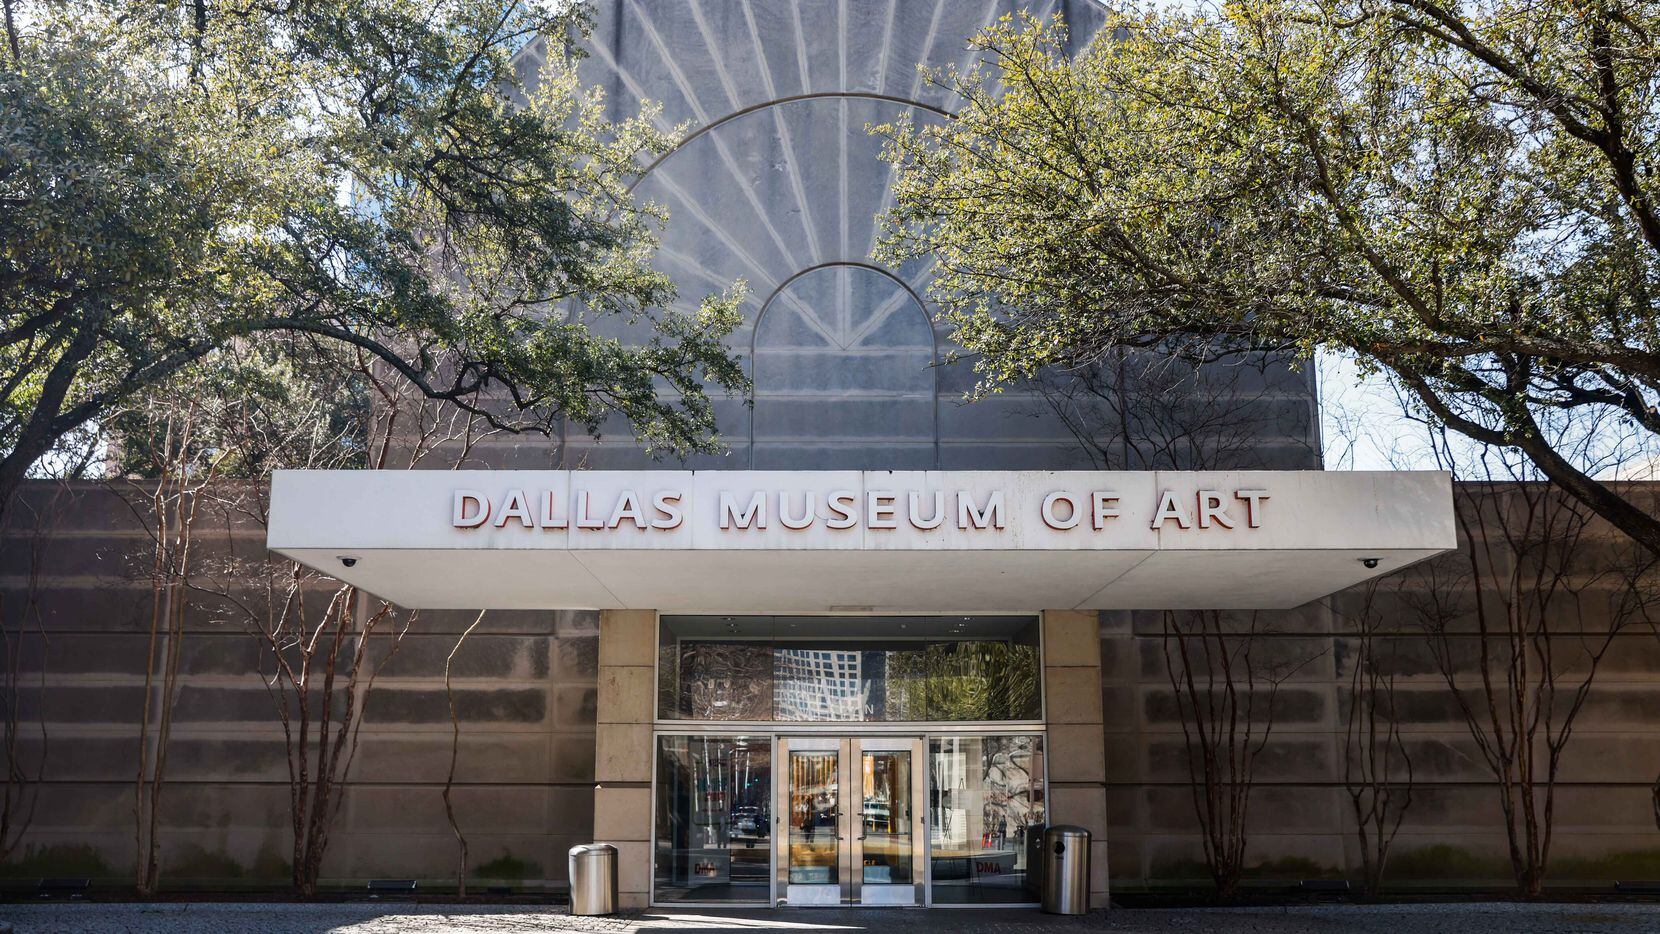 The Dallas Museum of Art is seeking a portion of funds from the city's upcoming bond package...